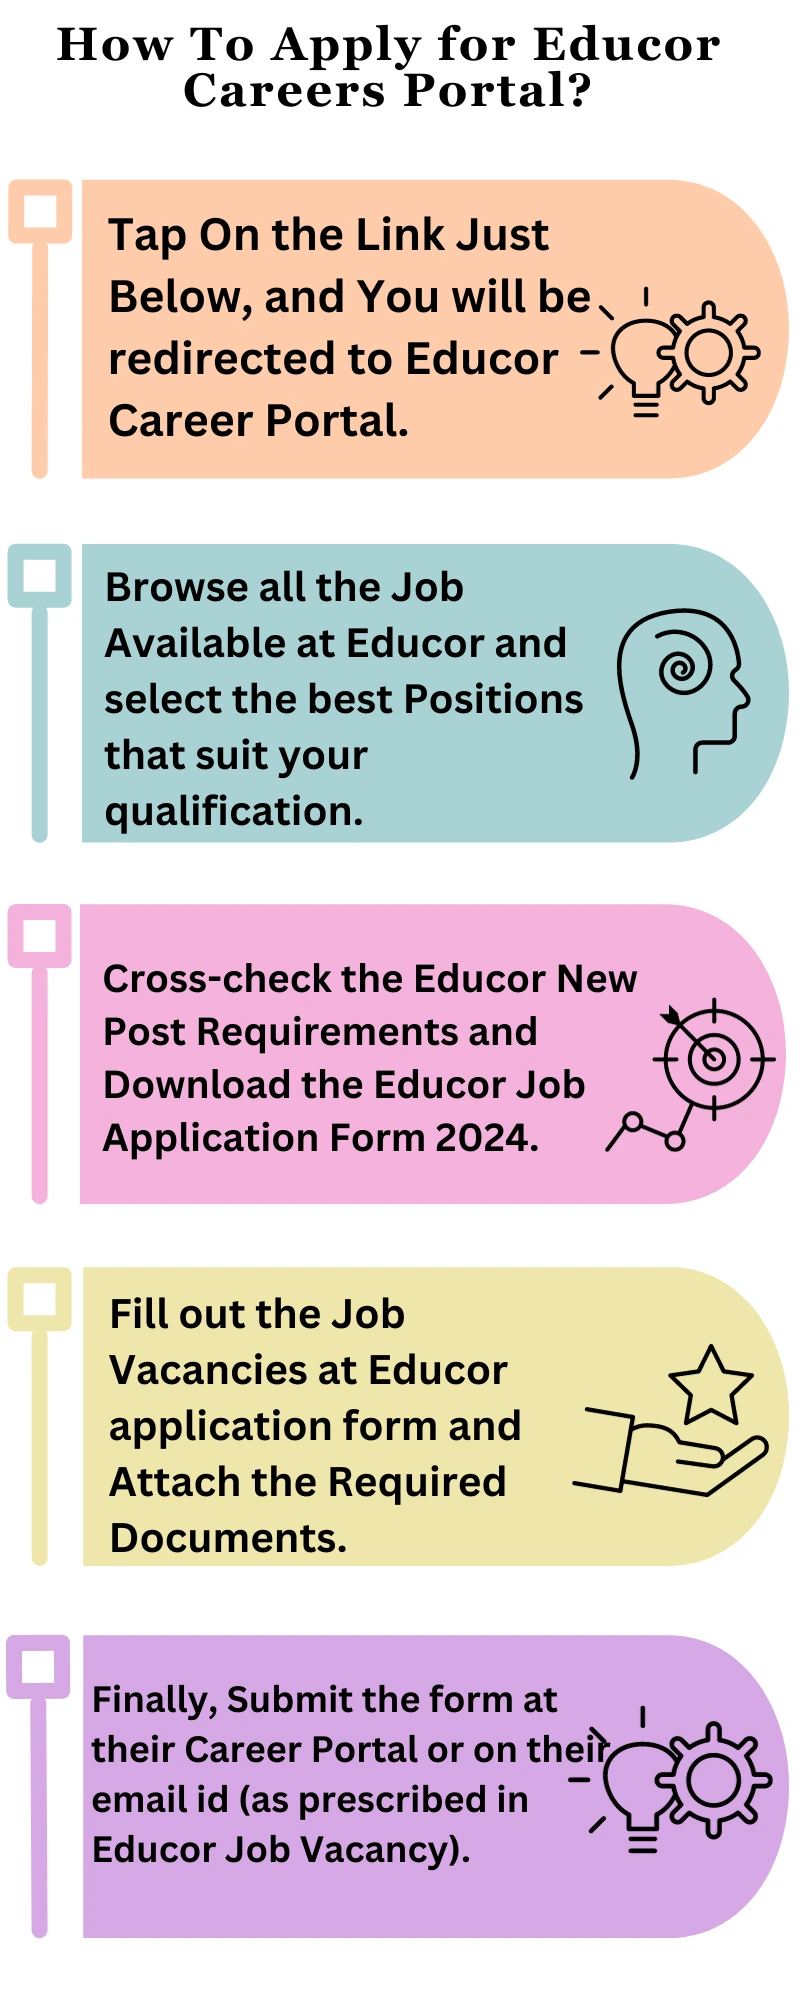 How To Apply for Educor Careers Portal?